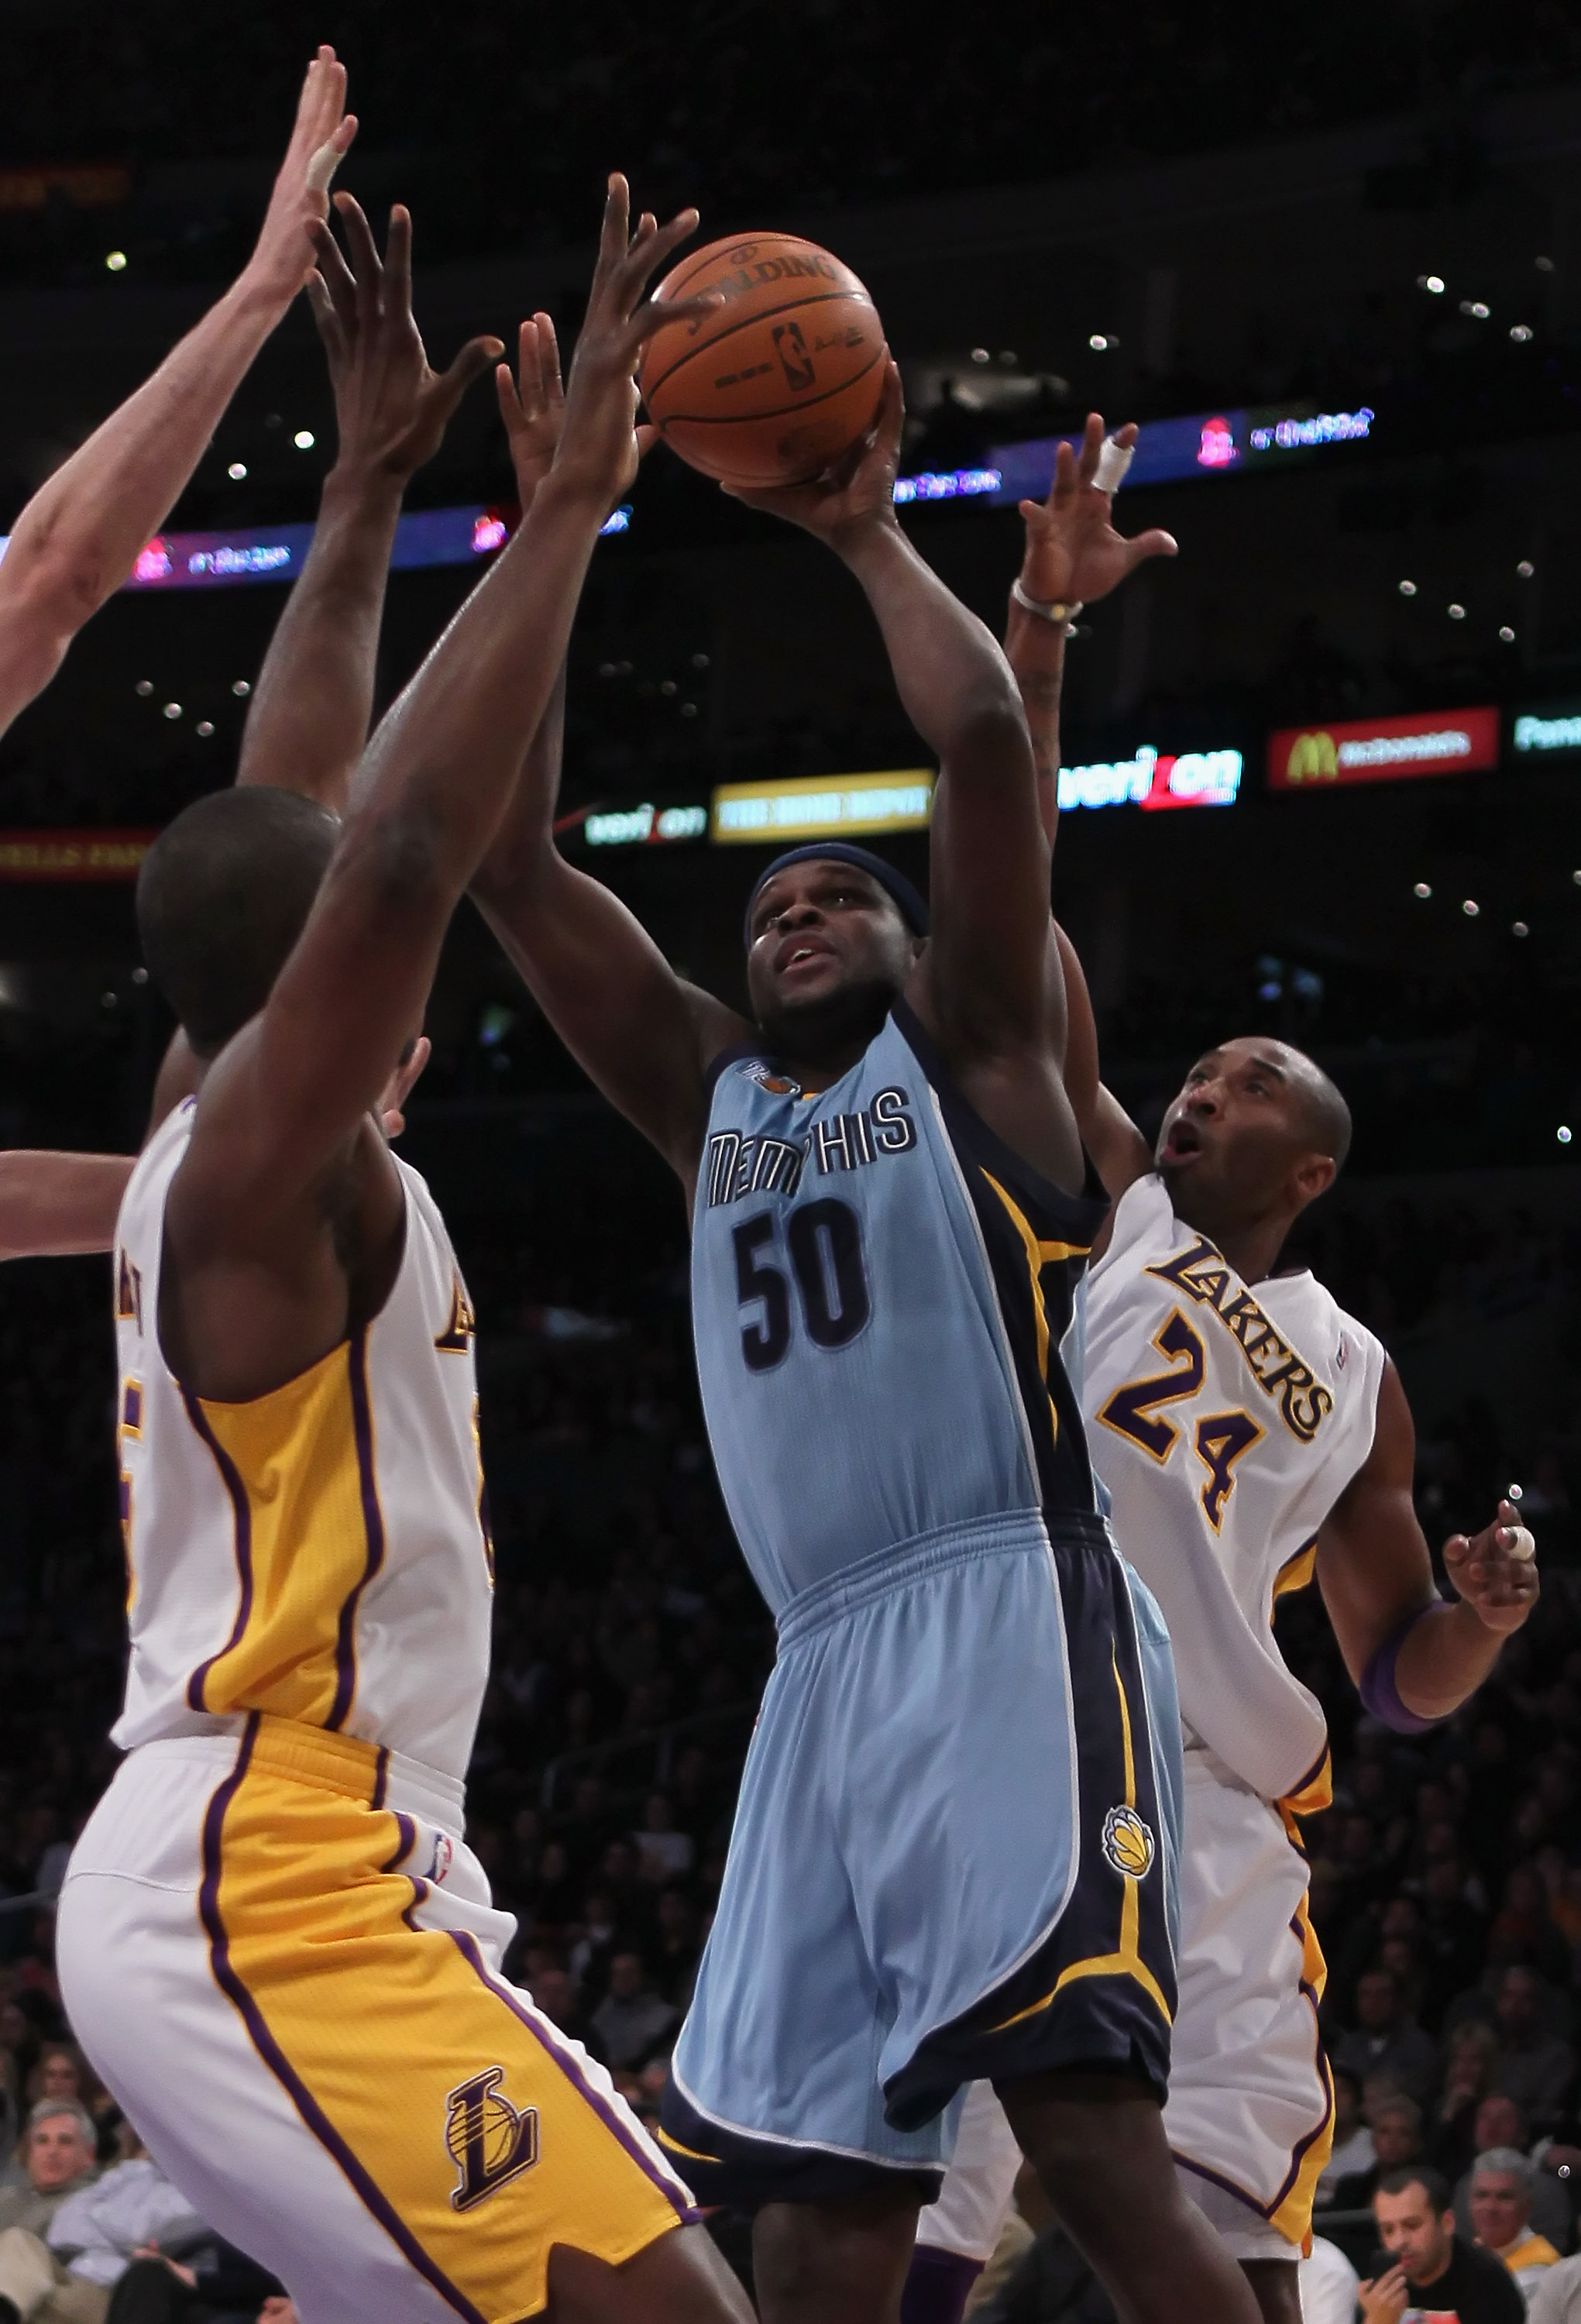 LOS ANGELES, CA - JANUARY 02:  Zach Randolph #50 of the Memphis Grizzlies is defended by Ron Artest (L) #15 and Kobe Bryant #24 of the Los Angeles Lakers during the first half at Staples Center on January 2, 2011 in Los Angeles, California. NOTE TO USER: